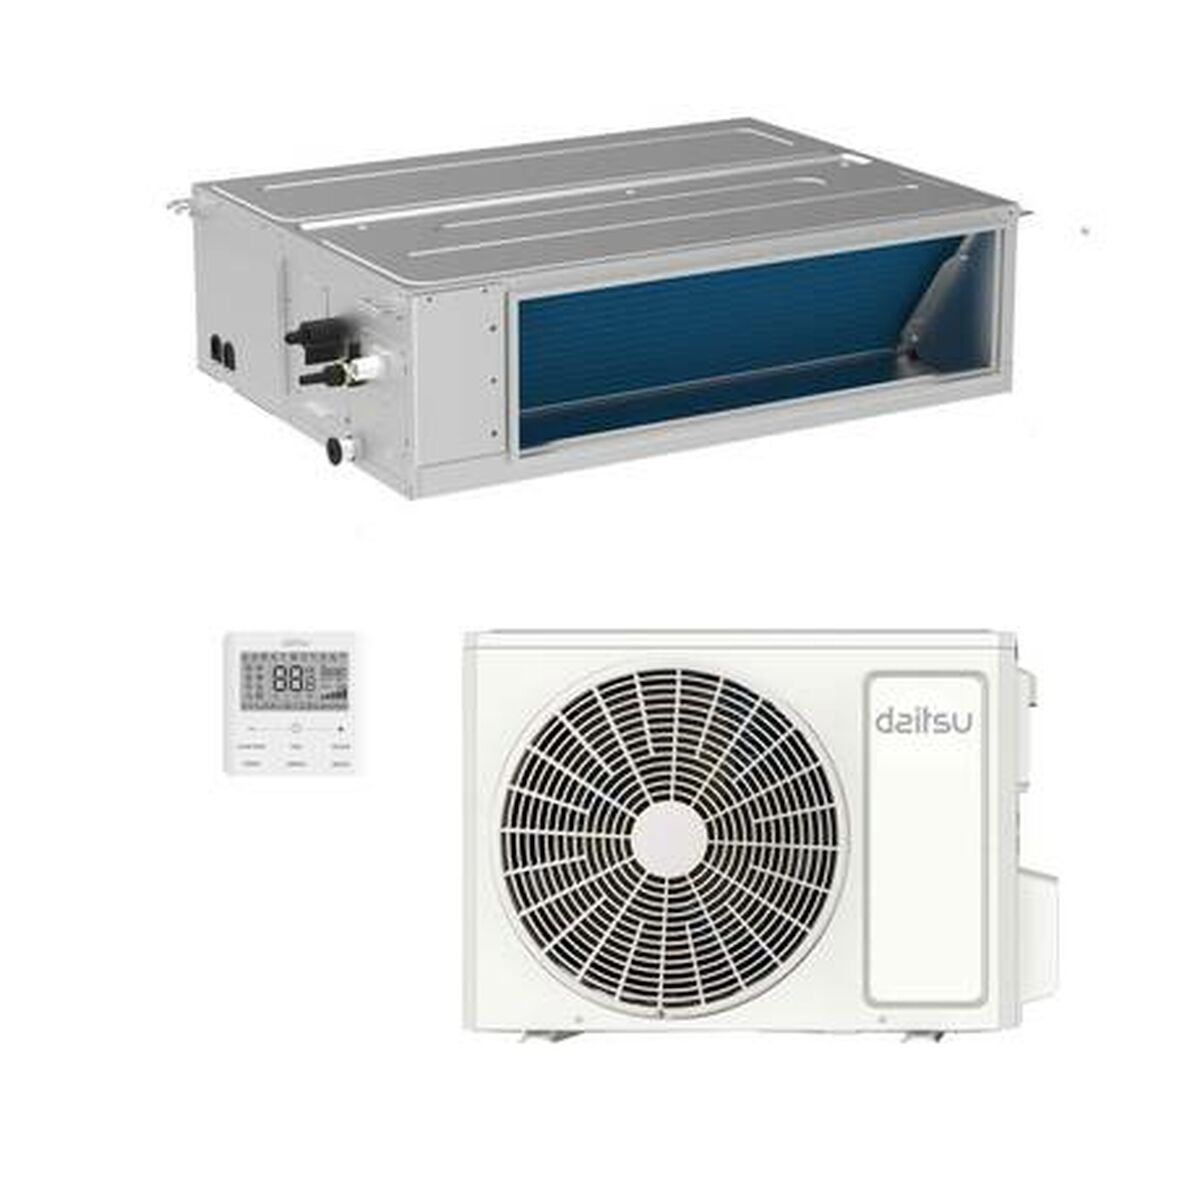 Duct Air Conditioning Daitsu ACD30KDBS A+ A++ 2500 W 2250 W, Daitsu, Home and cooking, Portable air conditioning, duct-air-conditioning-daitsu-acd30kdbs-a-a-2500-w-2250-w, Brand_Daitsu, category-reference-2399, category-reference-2450, category-reference-2451, category-reference-t-19656, category-reference-t-21087, category-reference-t-25214, category-reference-t-29112, Condition_NEW, ferretería, Price_+ 1000, summer, RiotNook